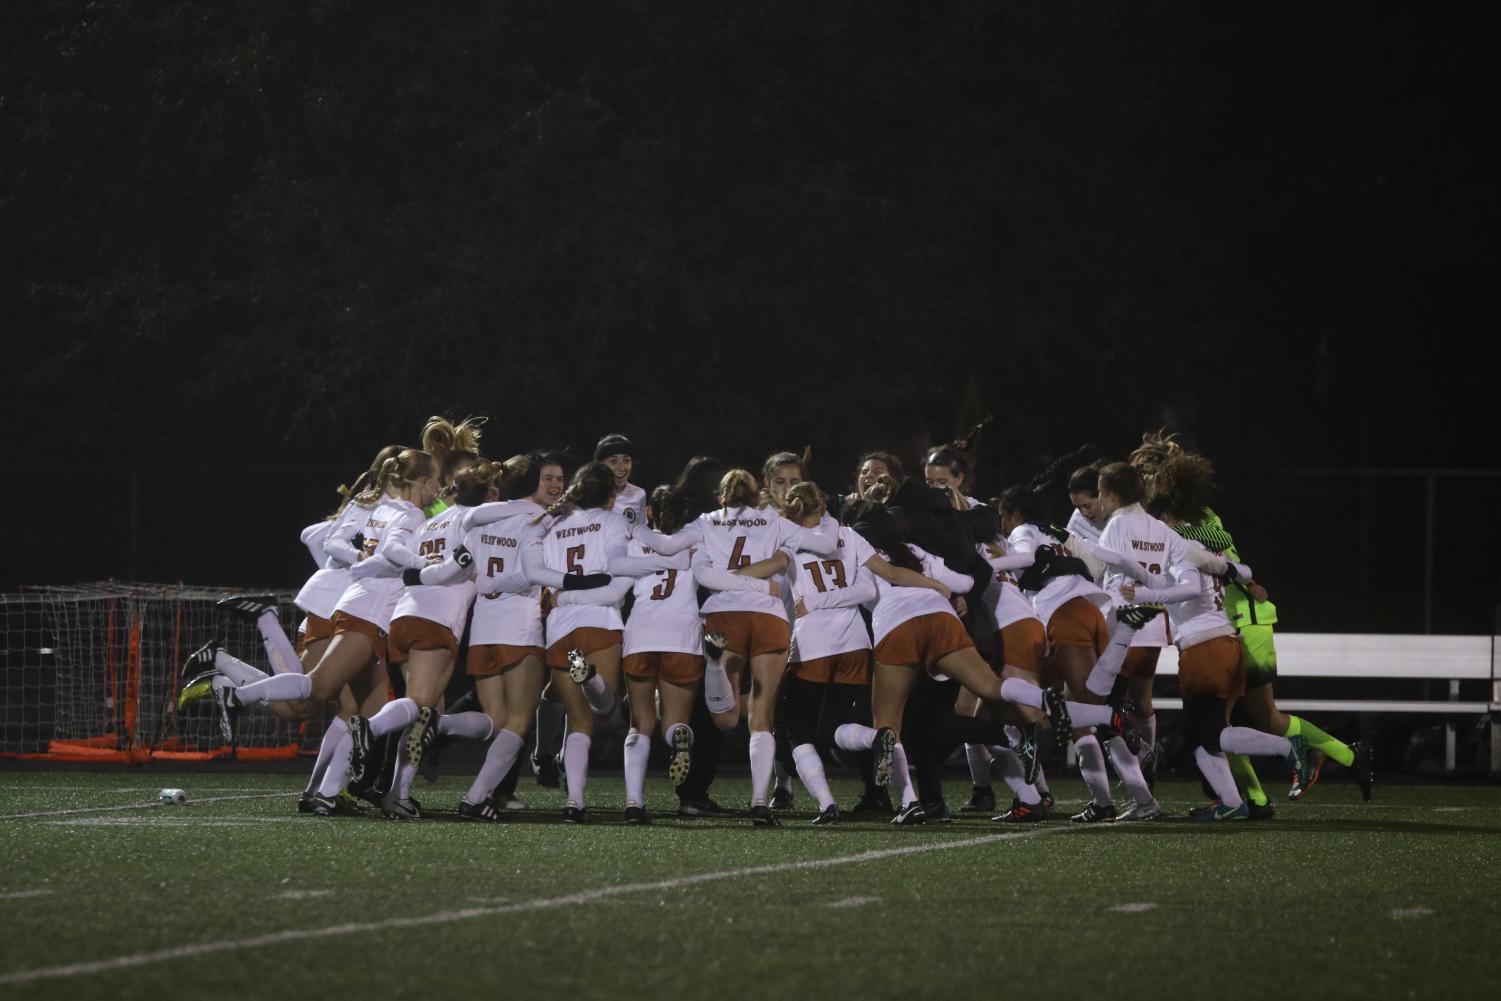 Varsity+Girls+Soccer+Ties+Round+Rock+2-2%2C+Maintains+Undefeated+Home+Streak